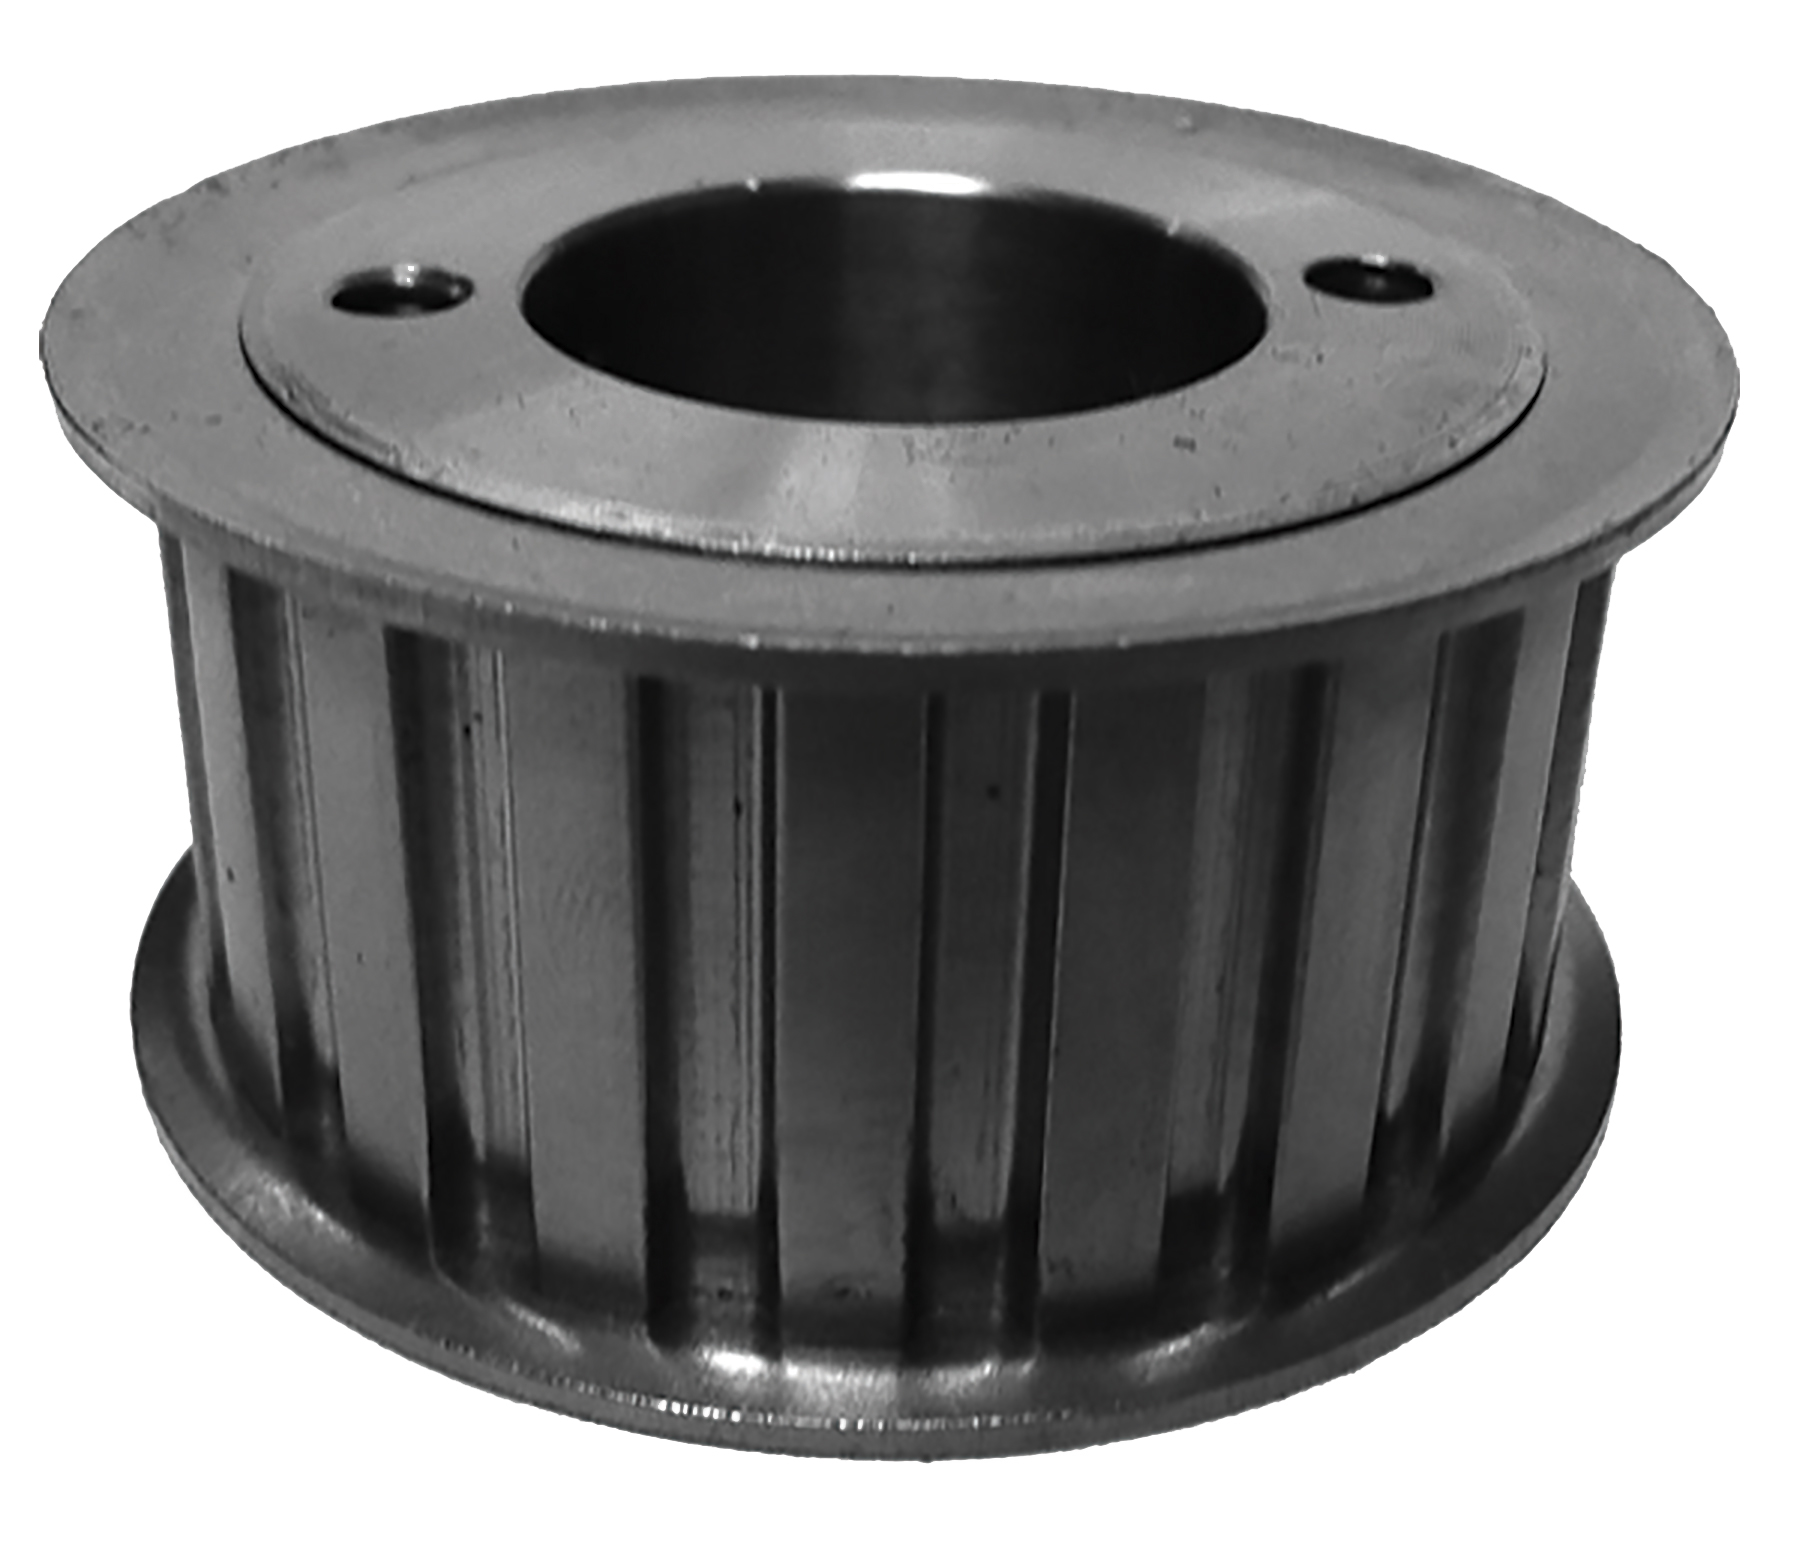 22LG100 - Steel Imperial Pitch Pulleys